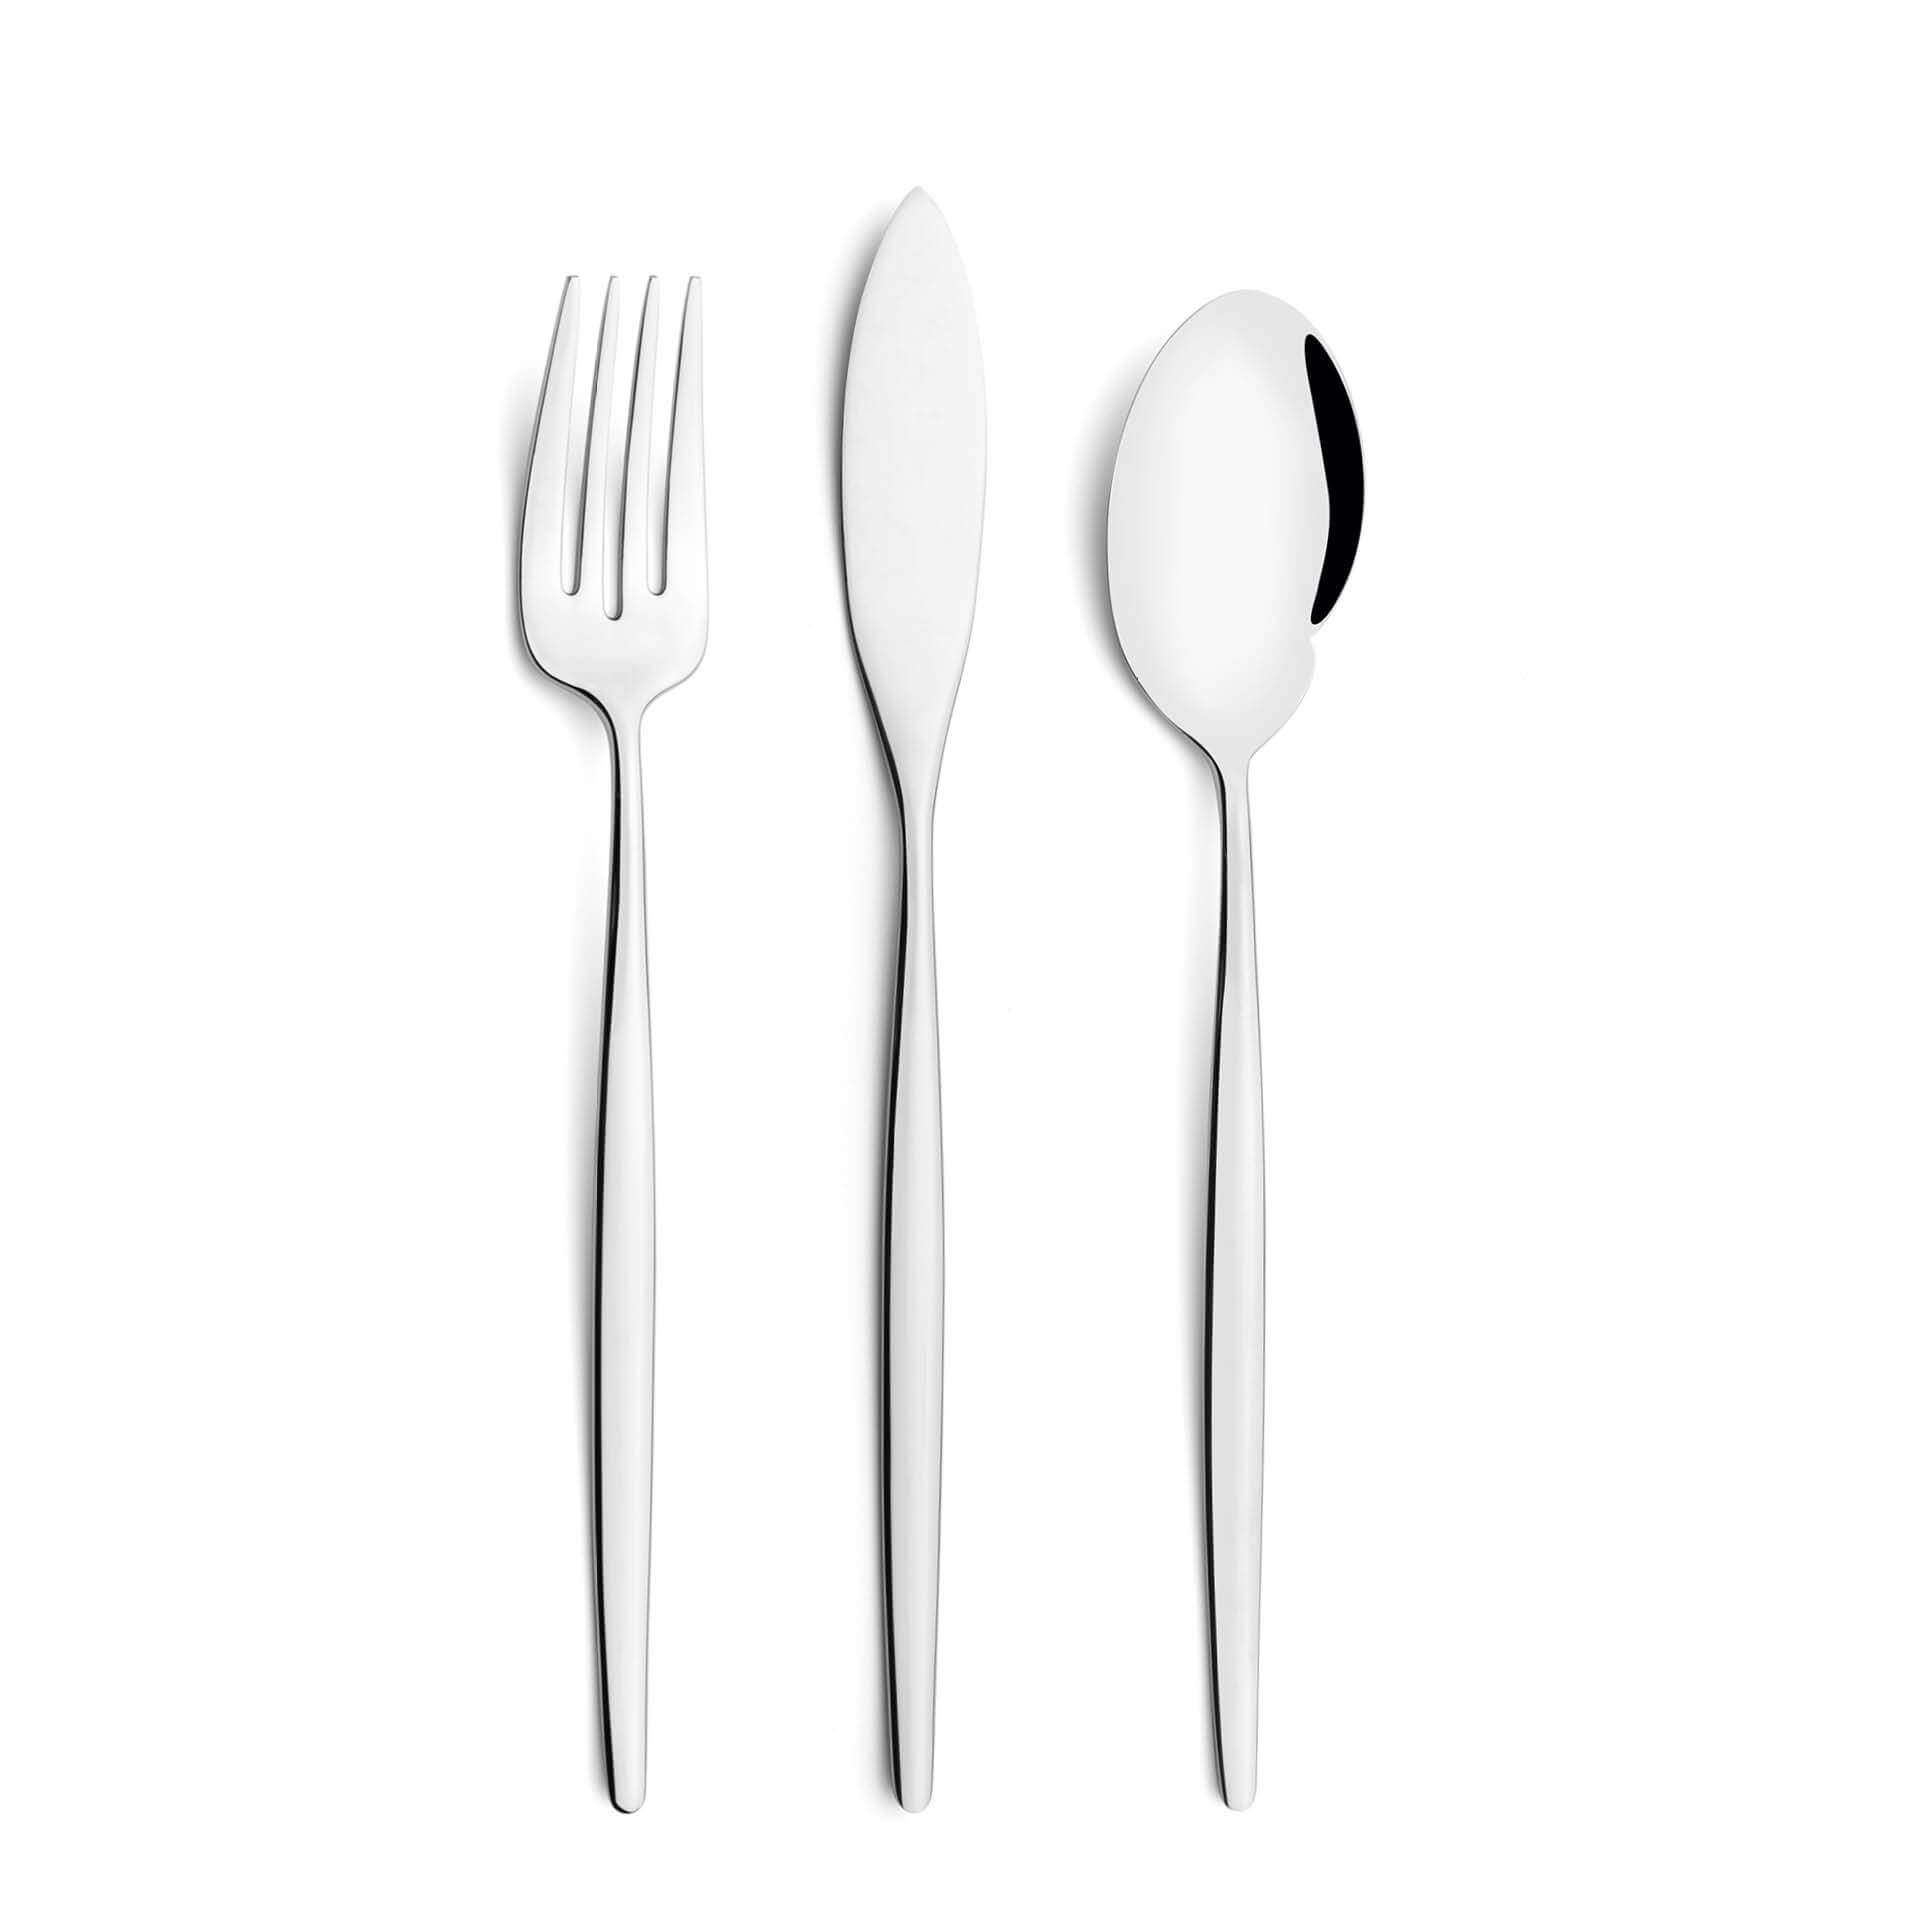 Cutipol Cutlery Solo with fish fork, fish knife and gourmet spoon